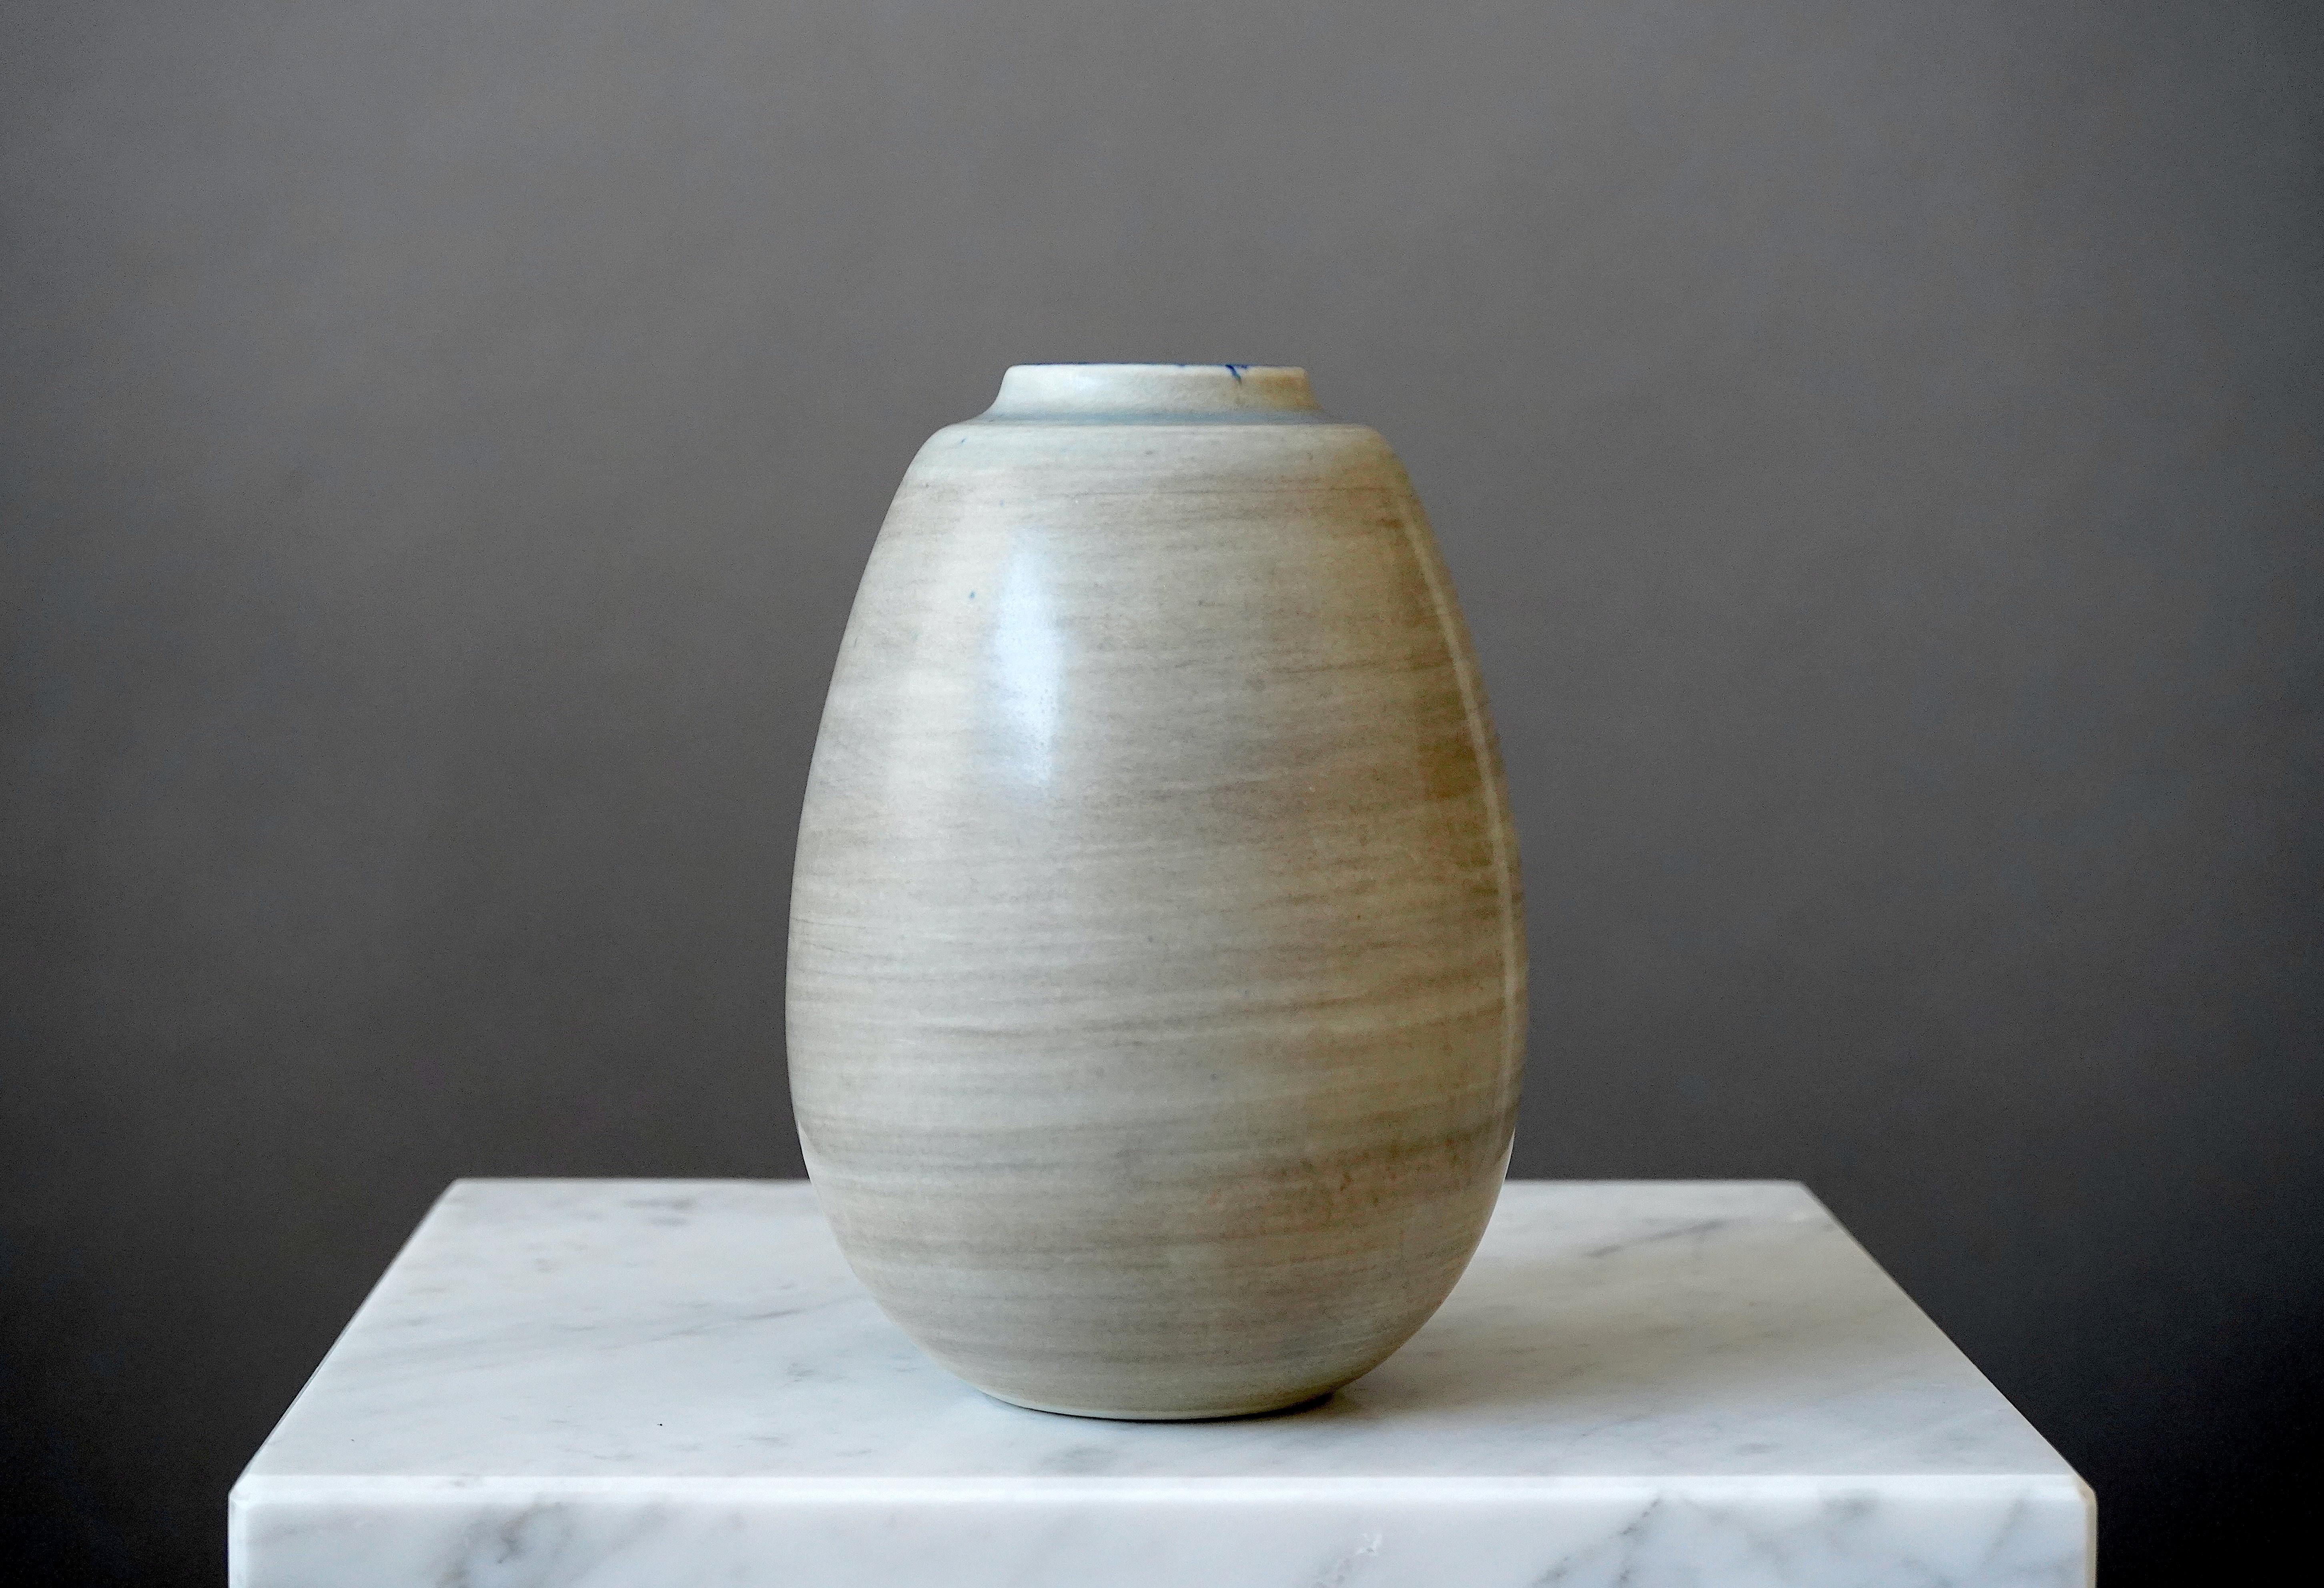 Beautiful and rare stoneware vase designed by Gertrud Lönegren.
This studio piece was created at Rorstrand in Sweden between 1936-41.

Excellent condition. Impressed 'Rörstrand / Lönegren / SWEDEN / HANDDREJAD'.

Gertrud Lönegren was a Swedish